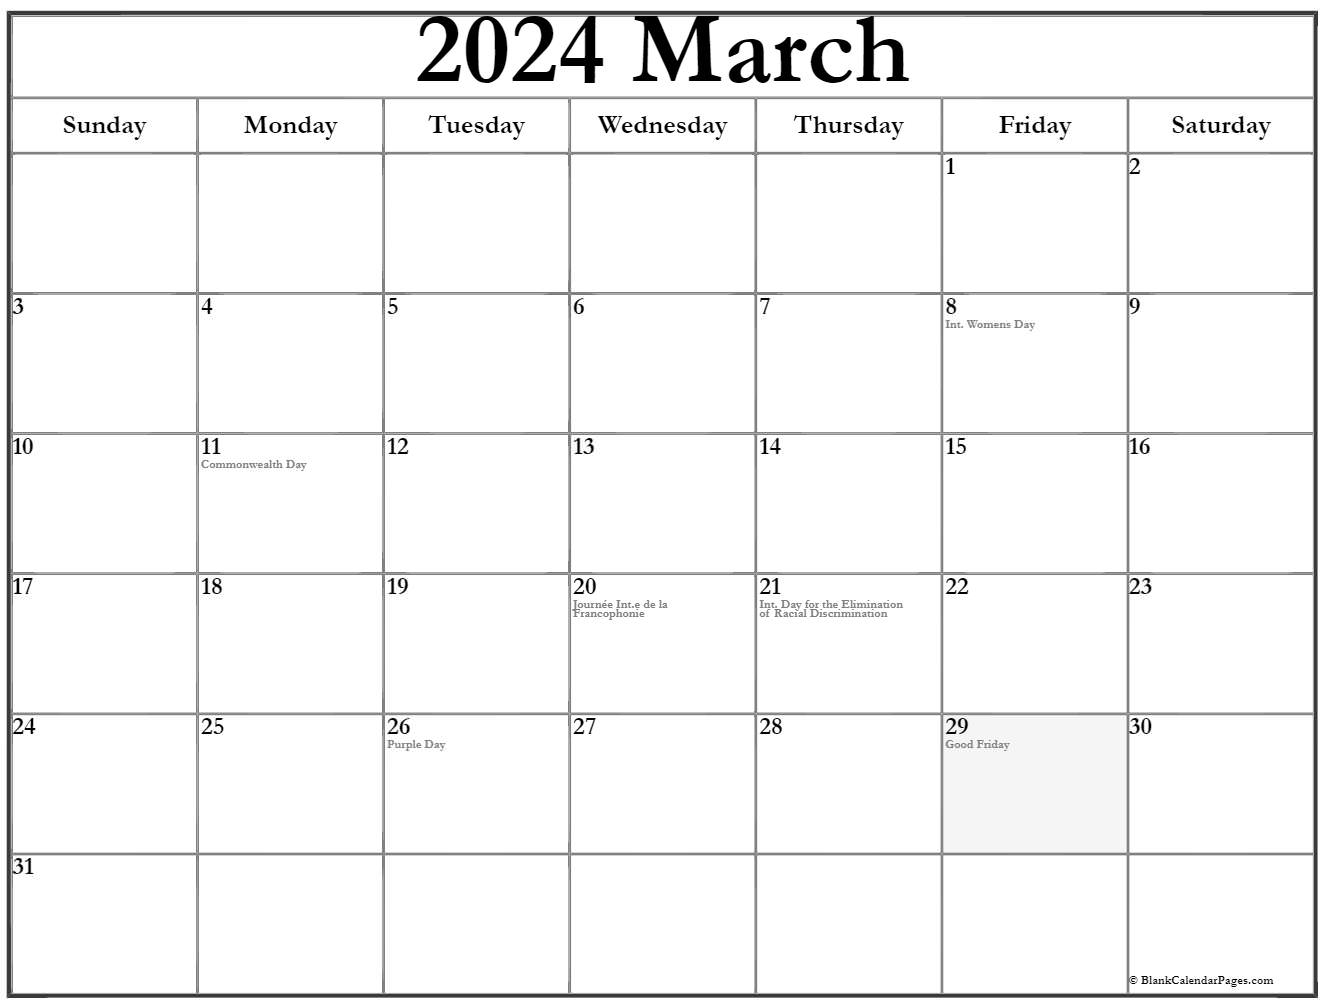 collection-of-march-2019-calendars-with-holidays